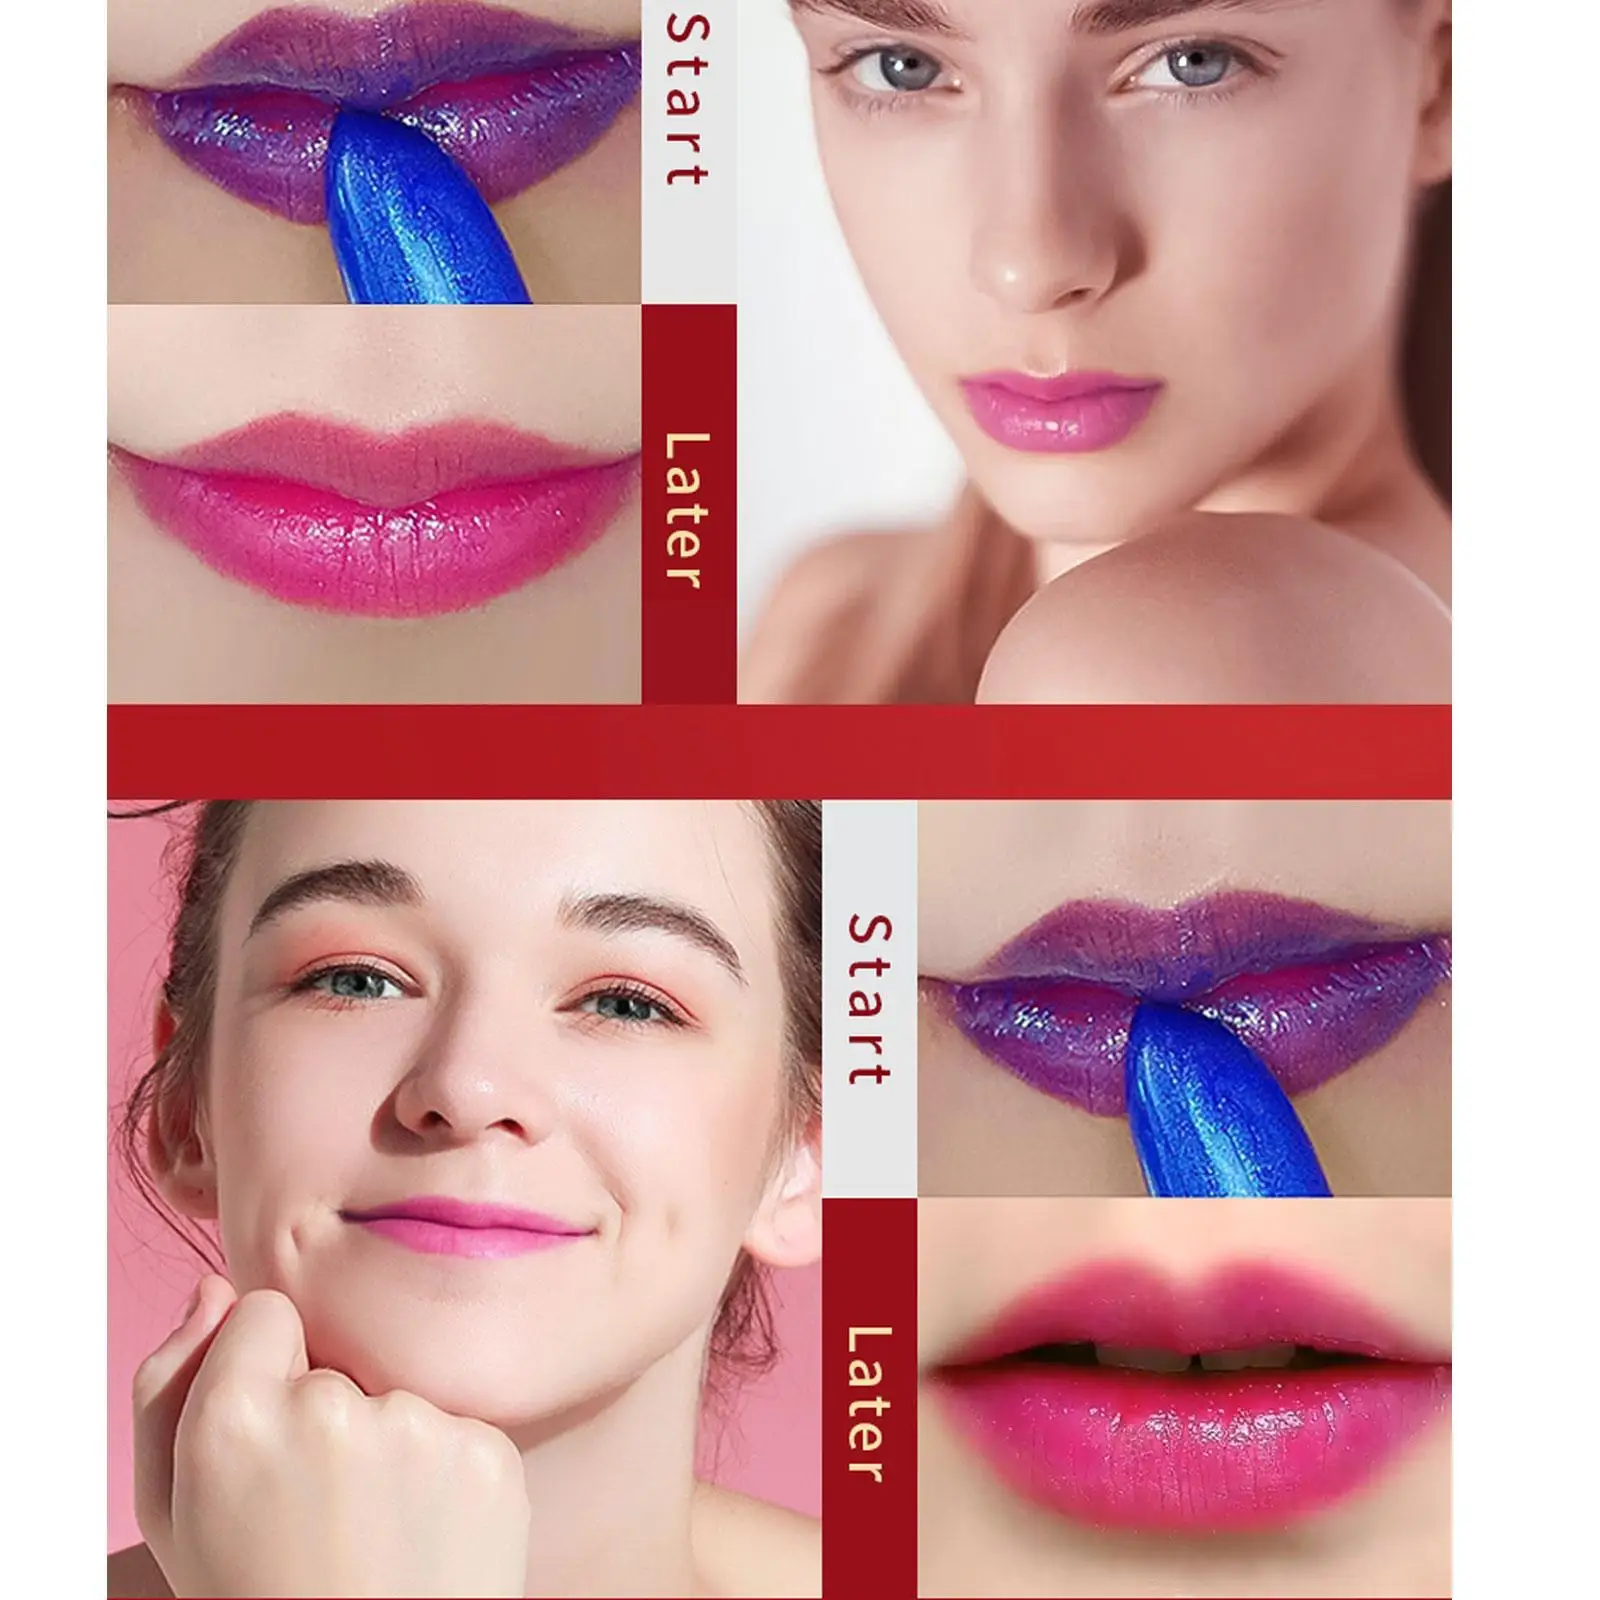 Blue Rose Lip Temperature Color Changing Natural Long Lasting Lipstick Stain Moisturizing Waterproof Makeup Gloss Lip Woman Y8f9 images - 6